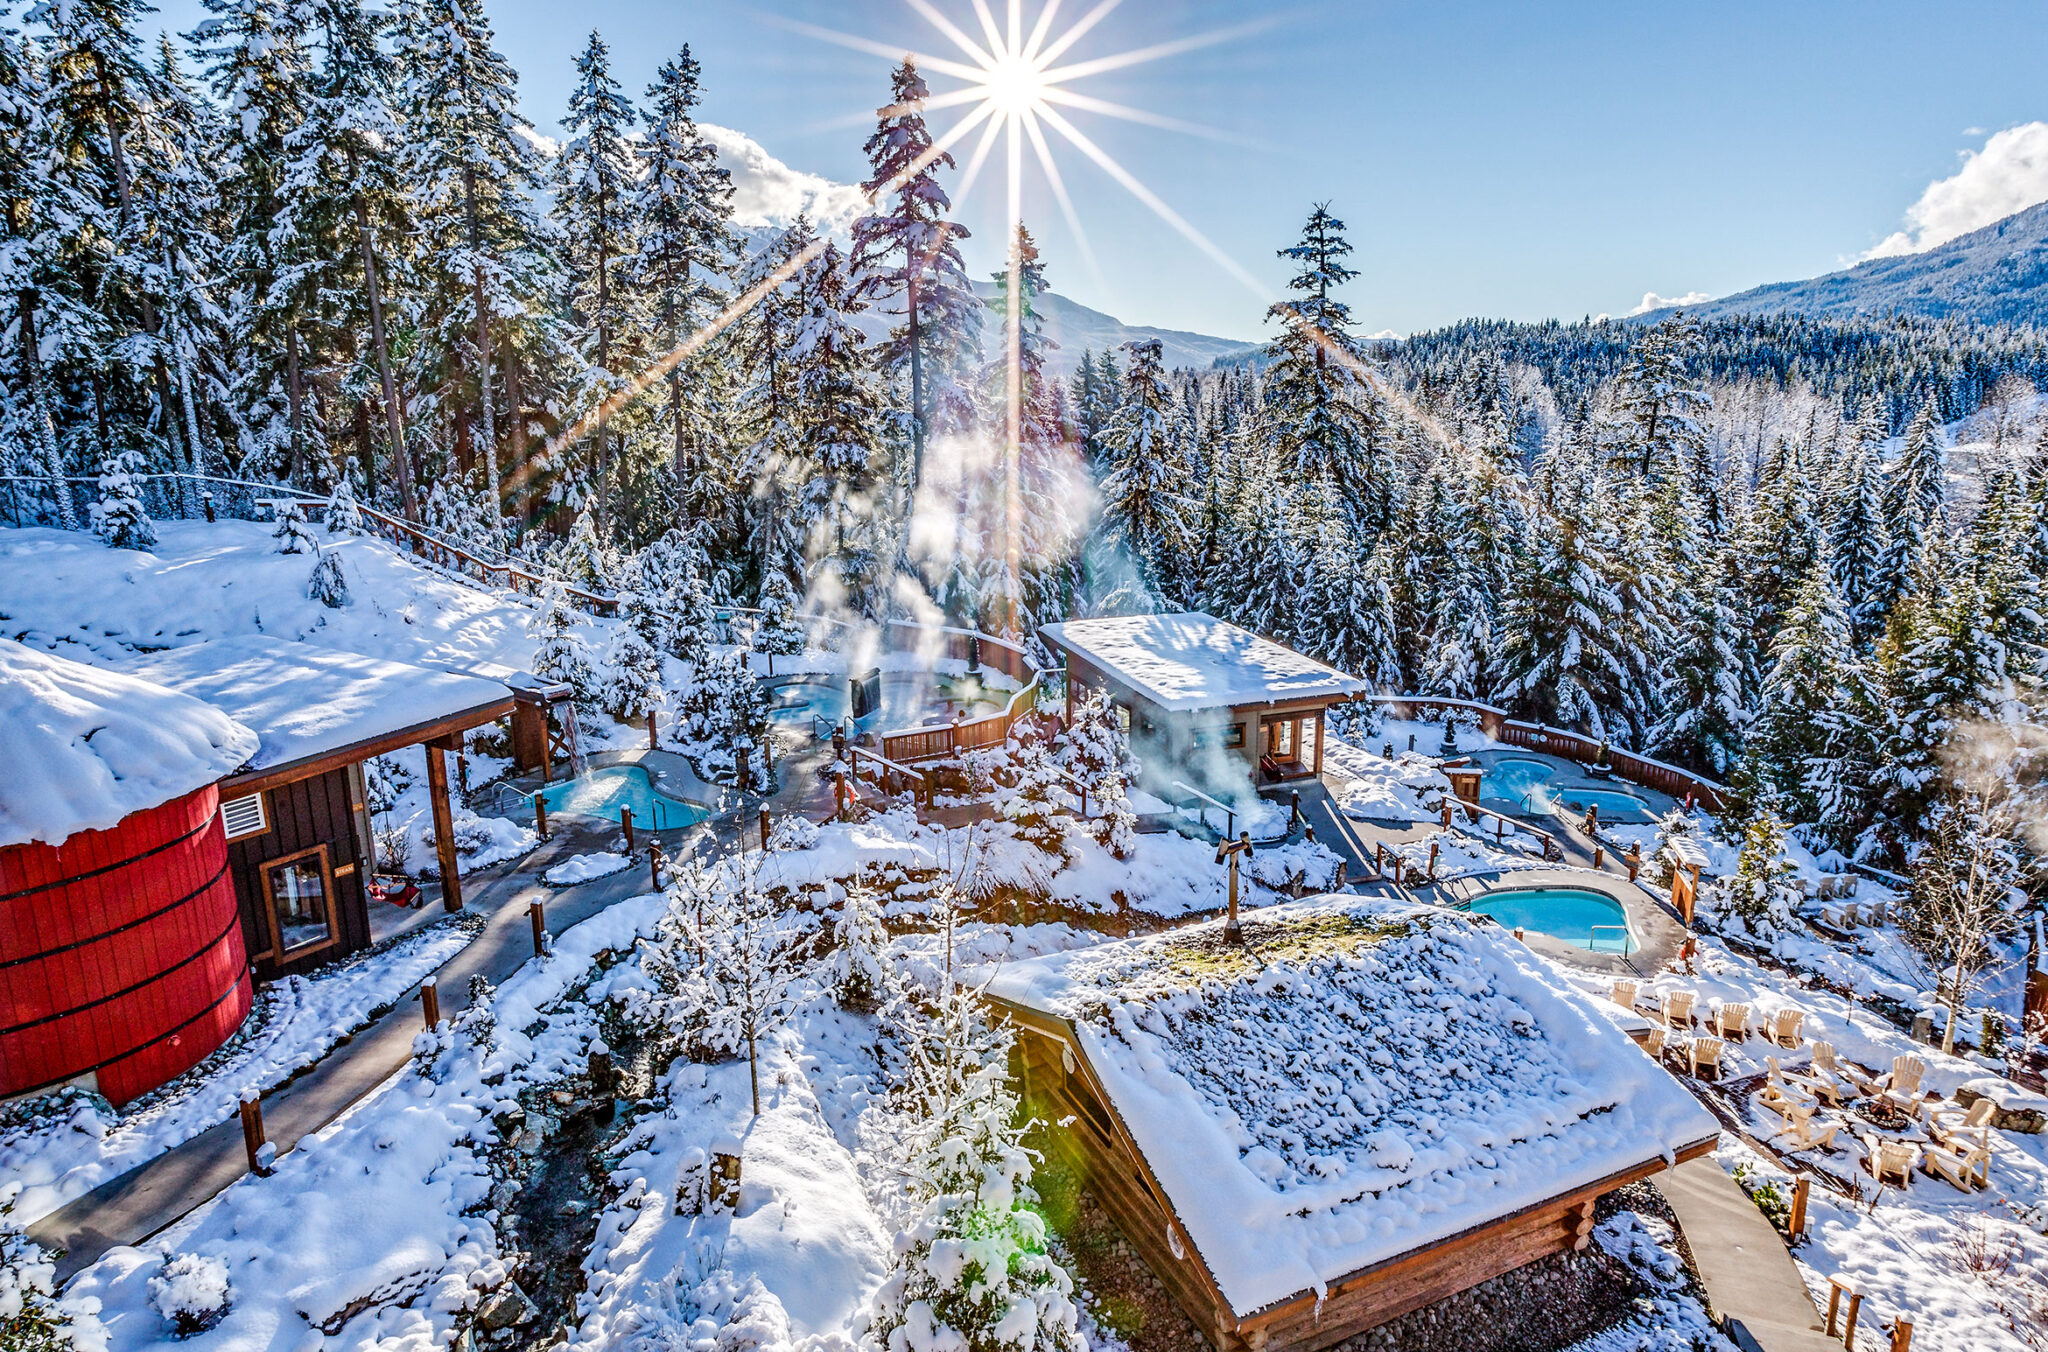 A shot of Scandinave Spa in the winter sunshine.